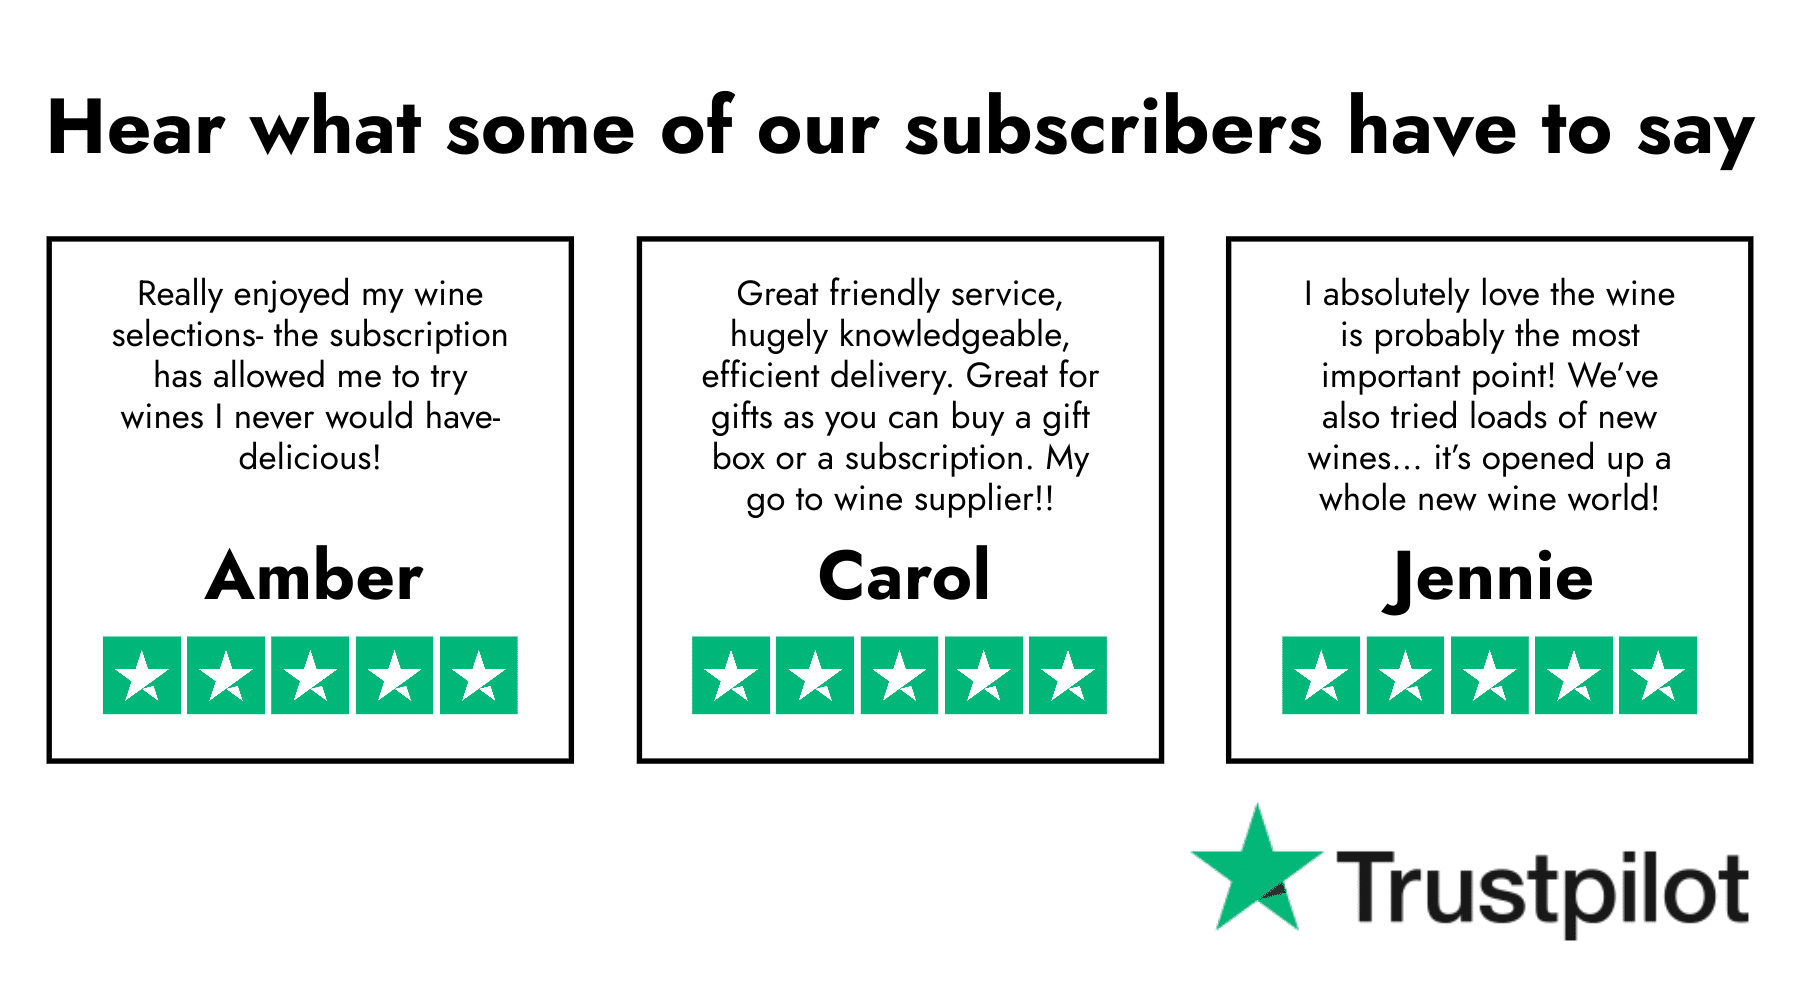 Testimonials from subscribers